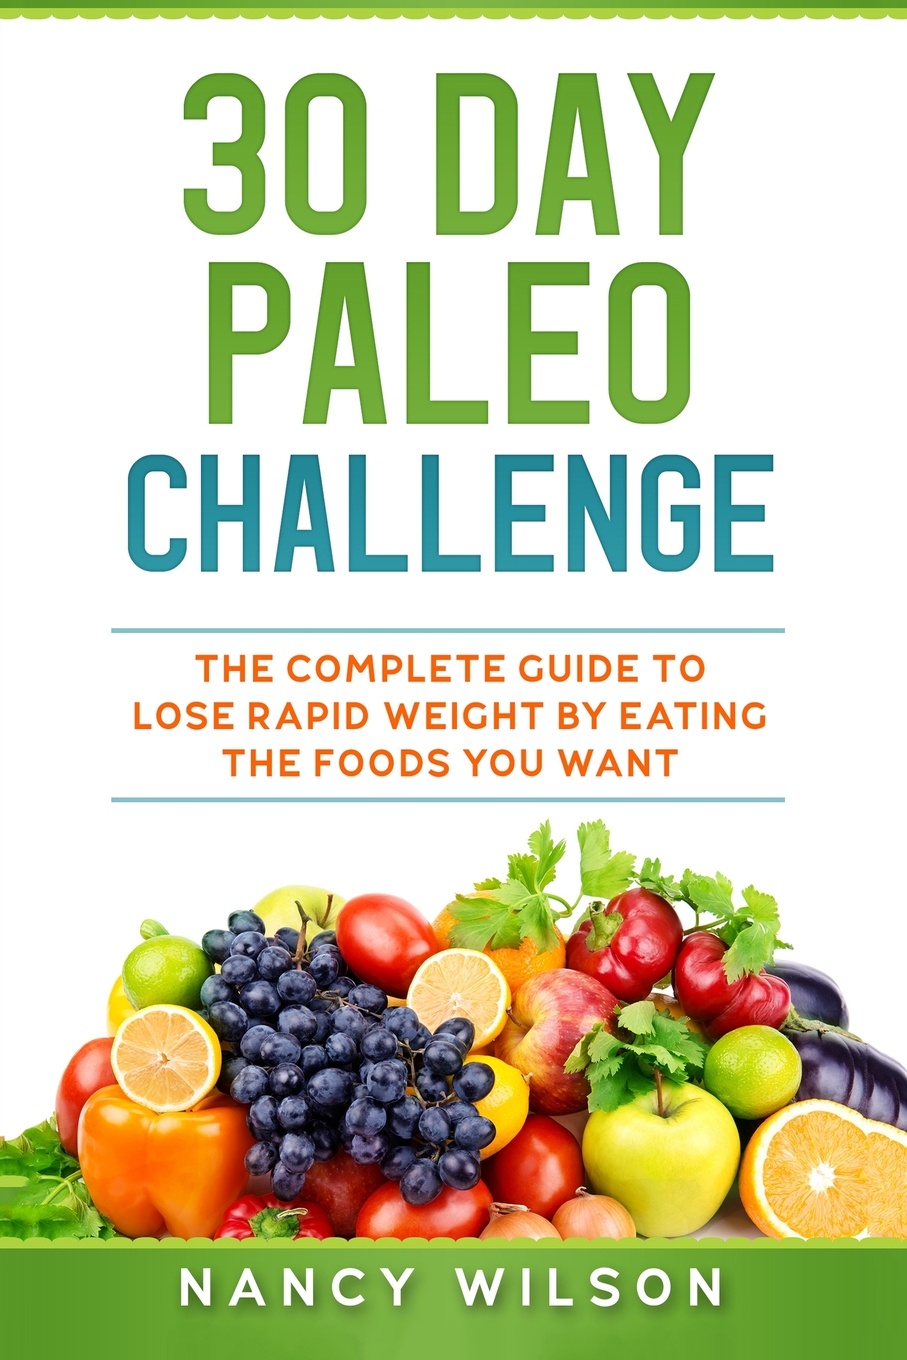 30 Day Paleo Challenge. The Complete Guide to Lose Rapid Weight by Eating the Foods you Want